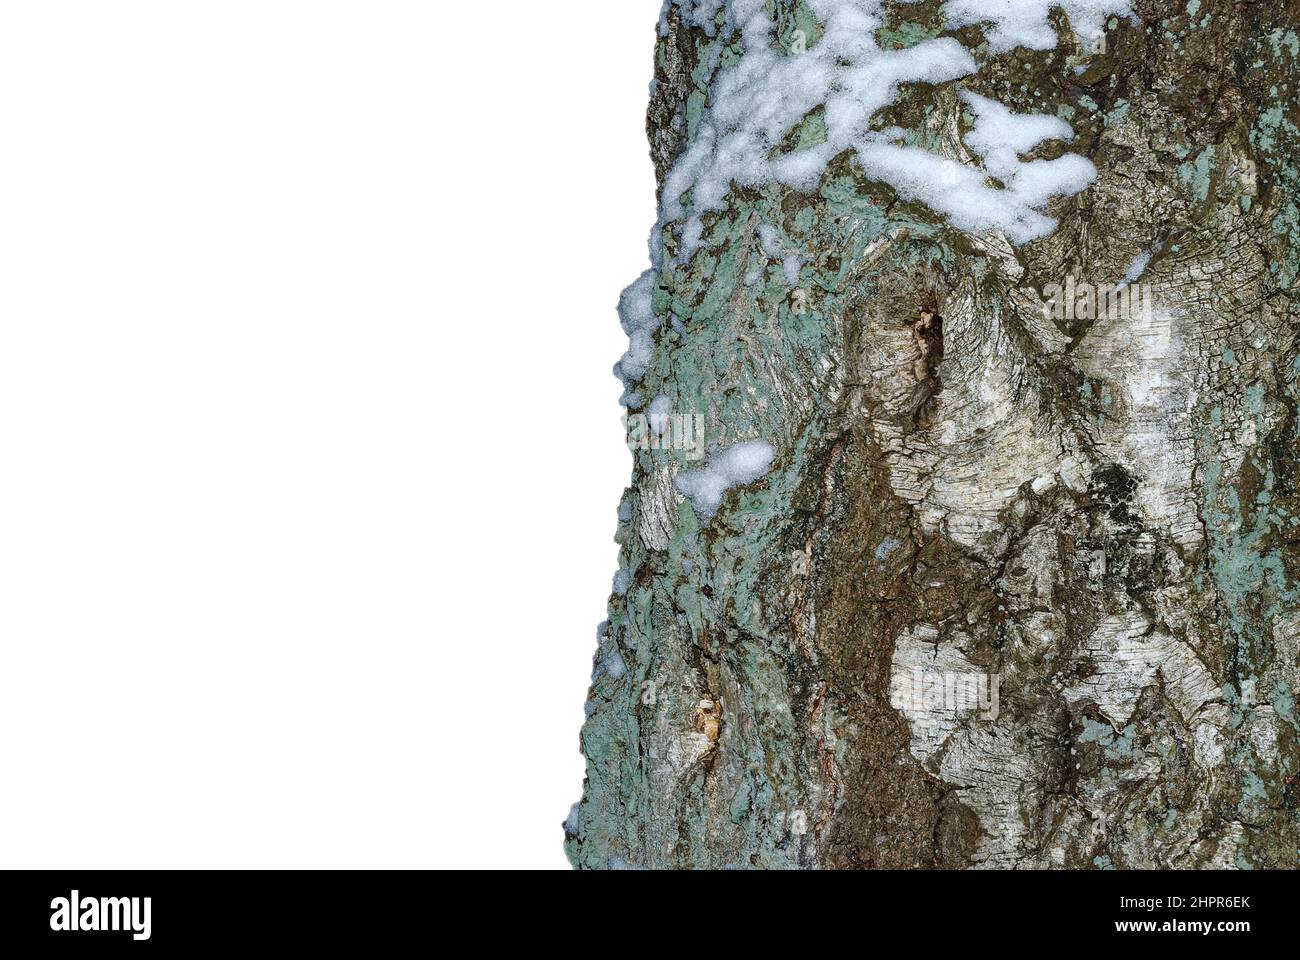 tree trunk close-up, isolated on a white background, with a bit of snow Stock Photo